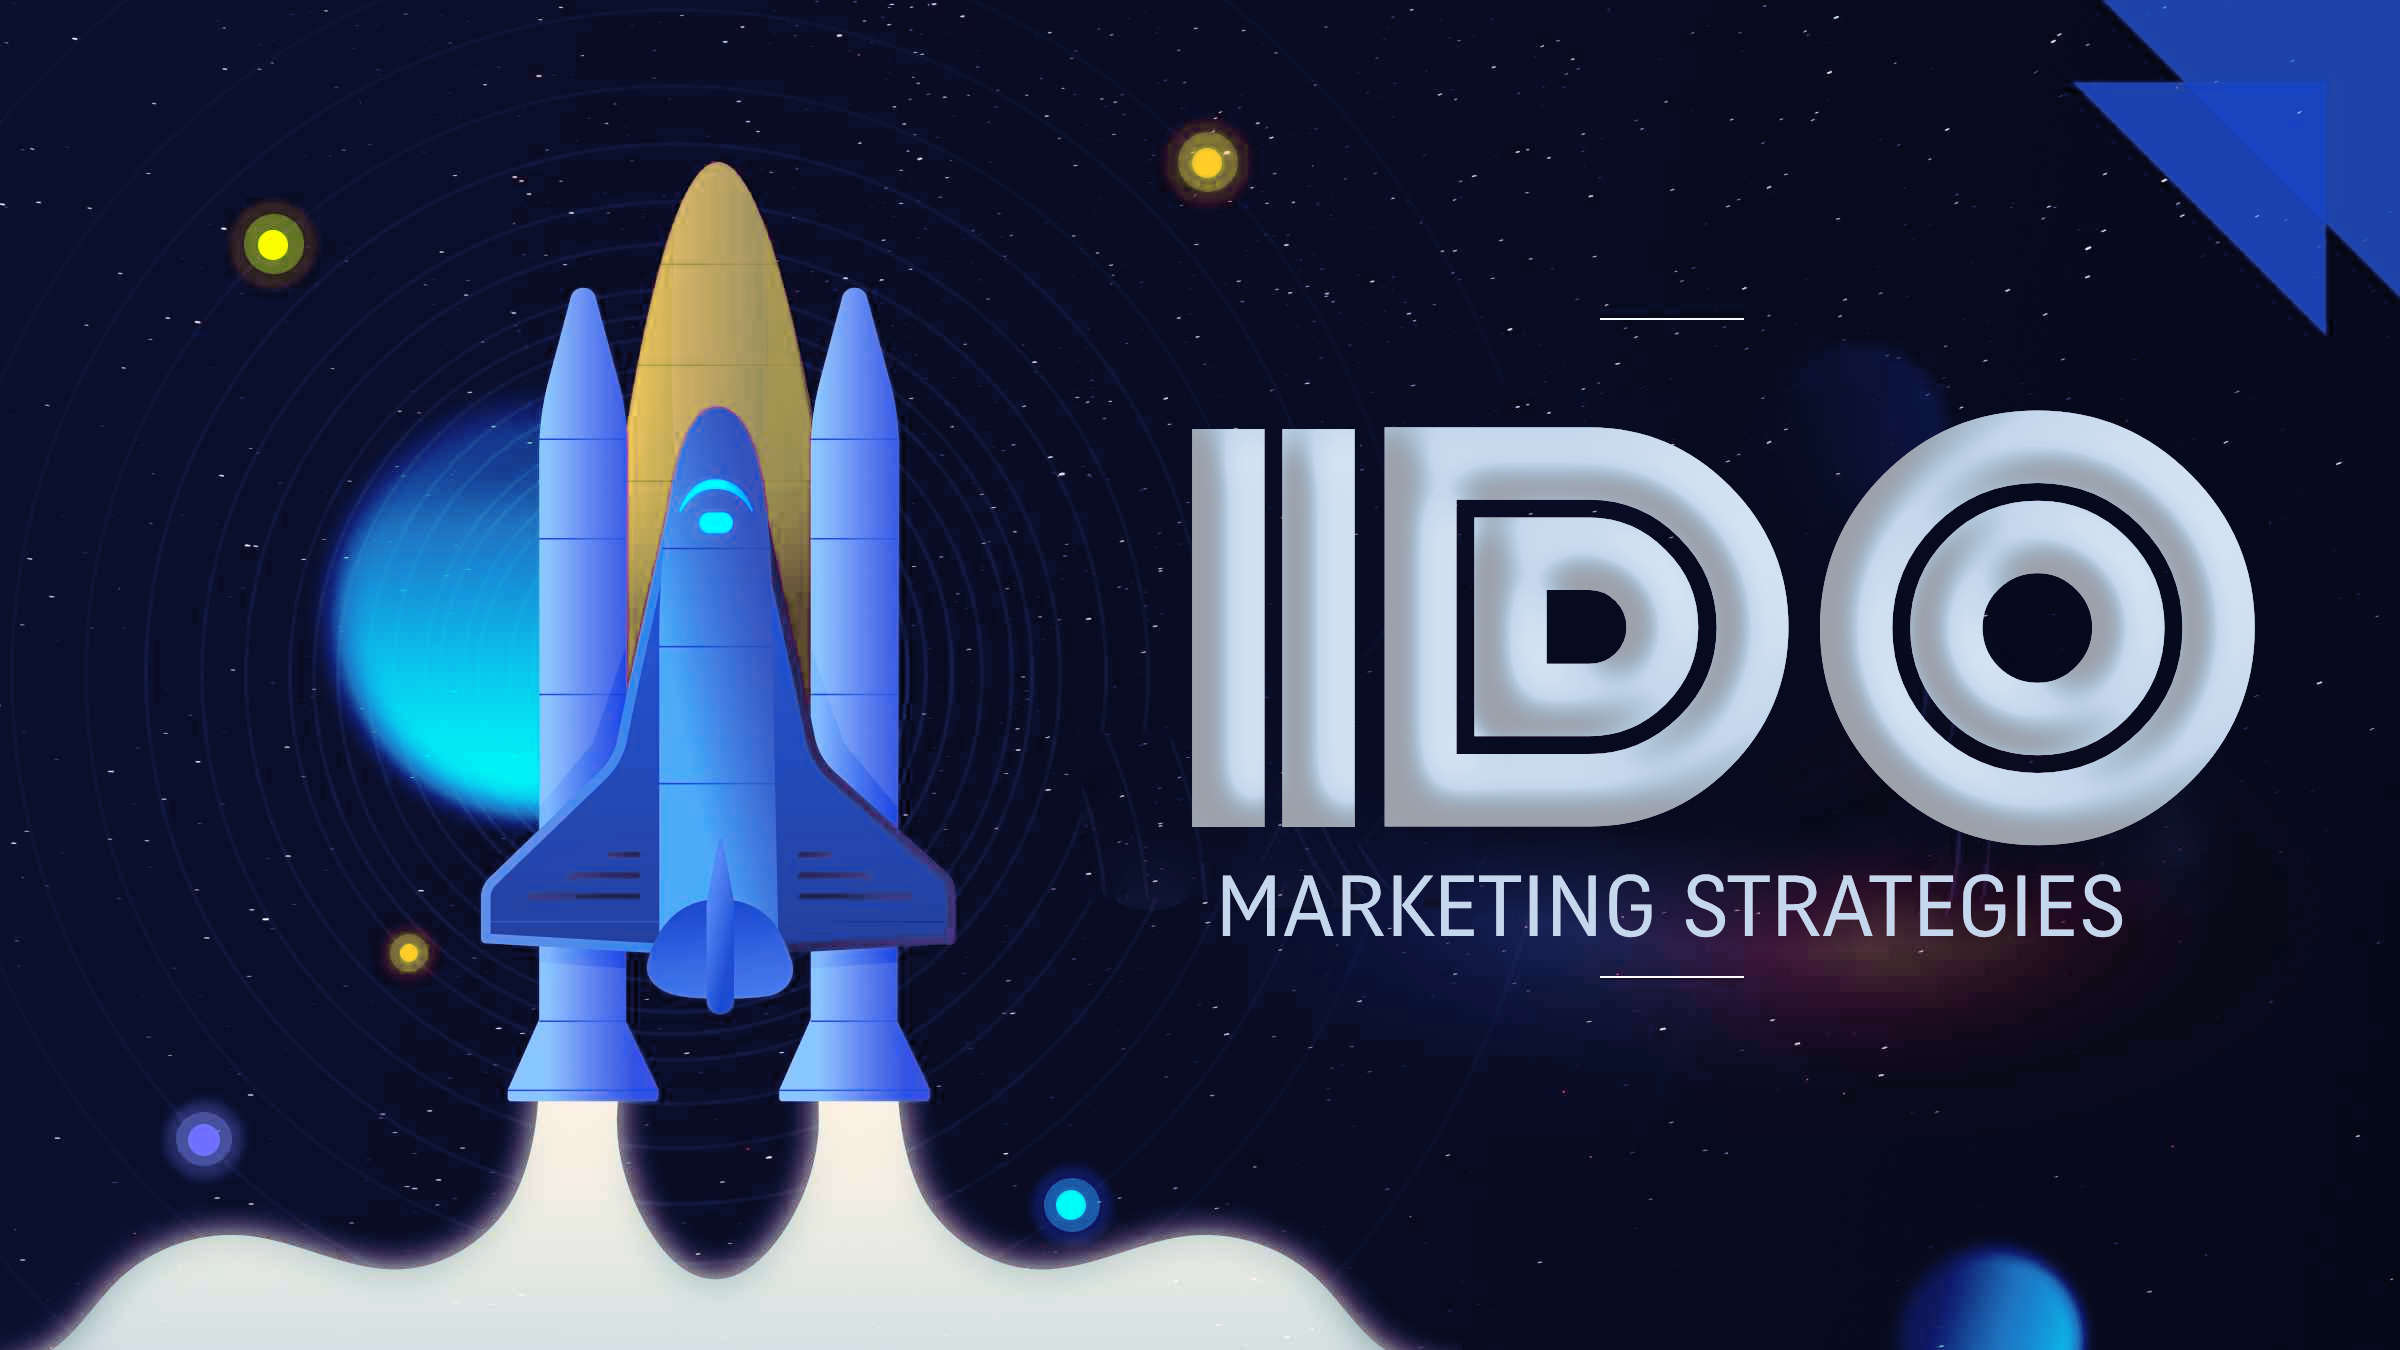 The Definitive Strategies for Succeeding in the IDO Arena